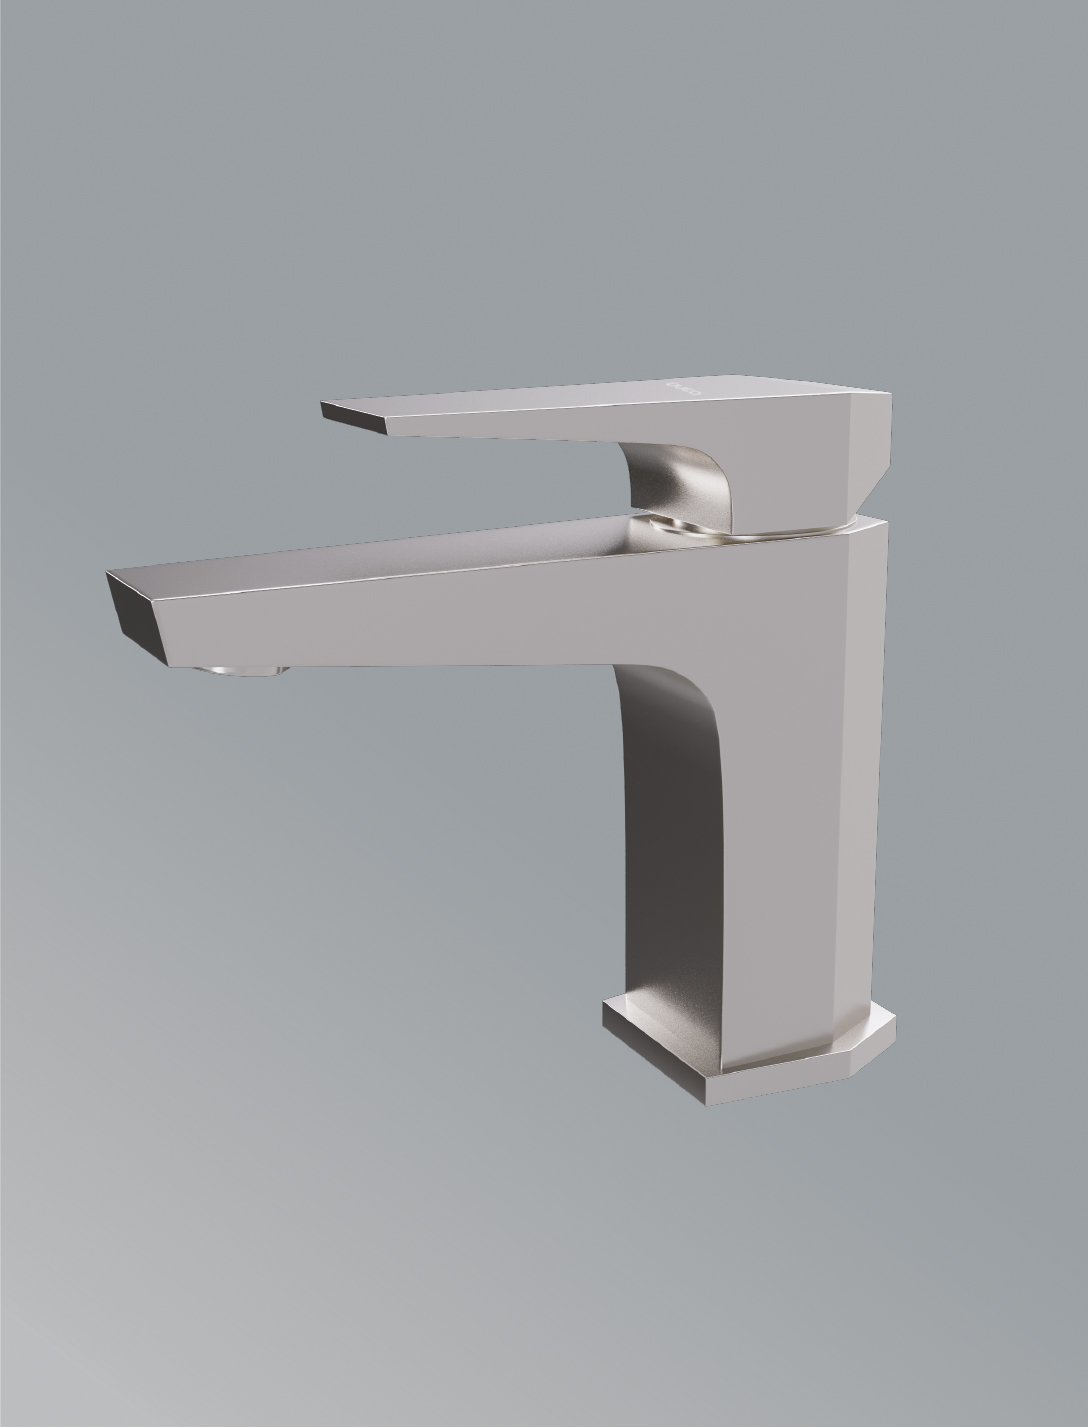  Single Control basin faucet in brushed nickel